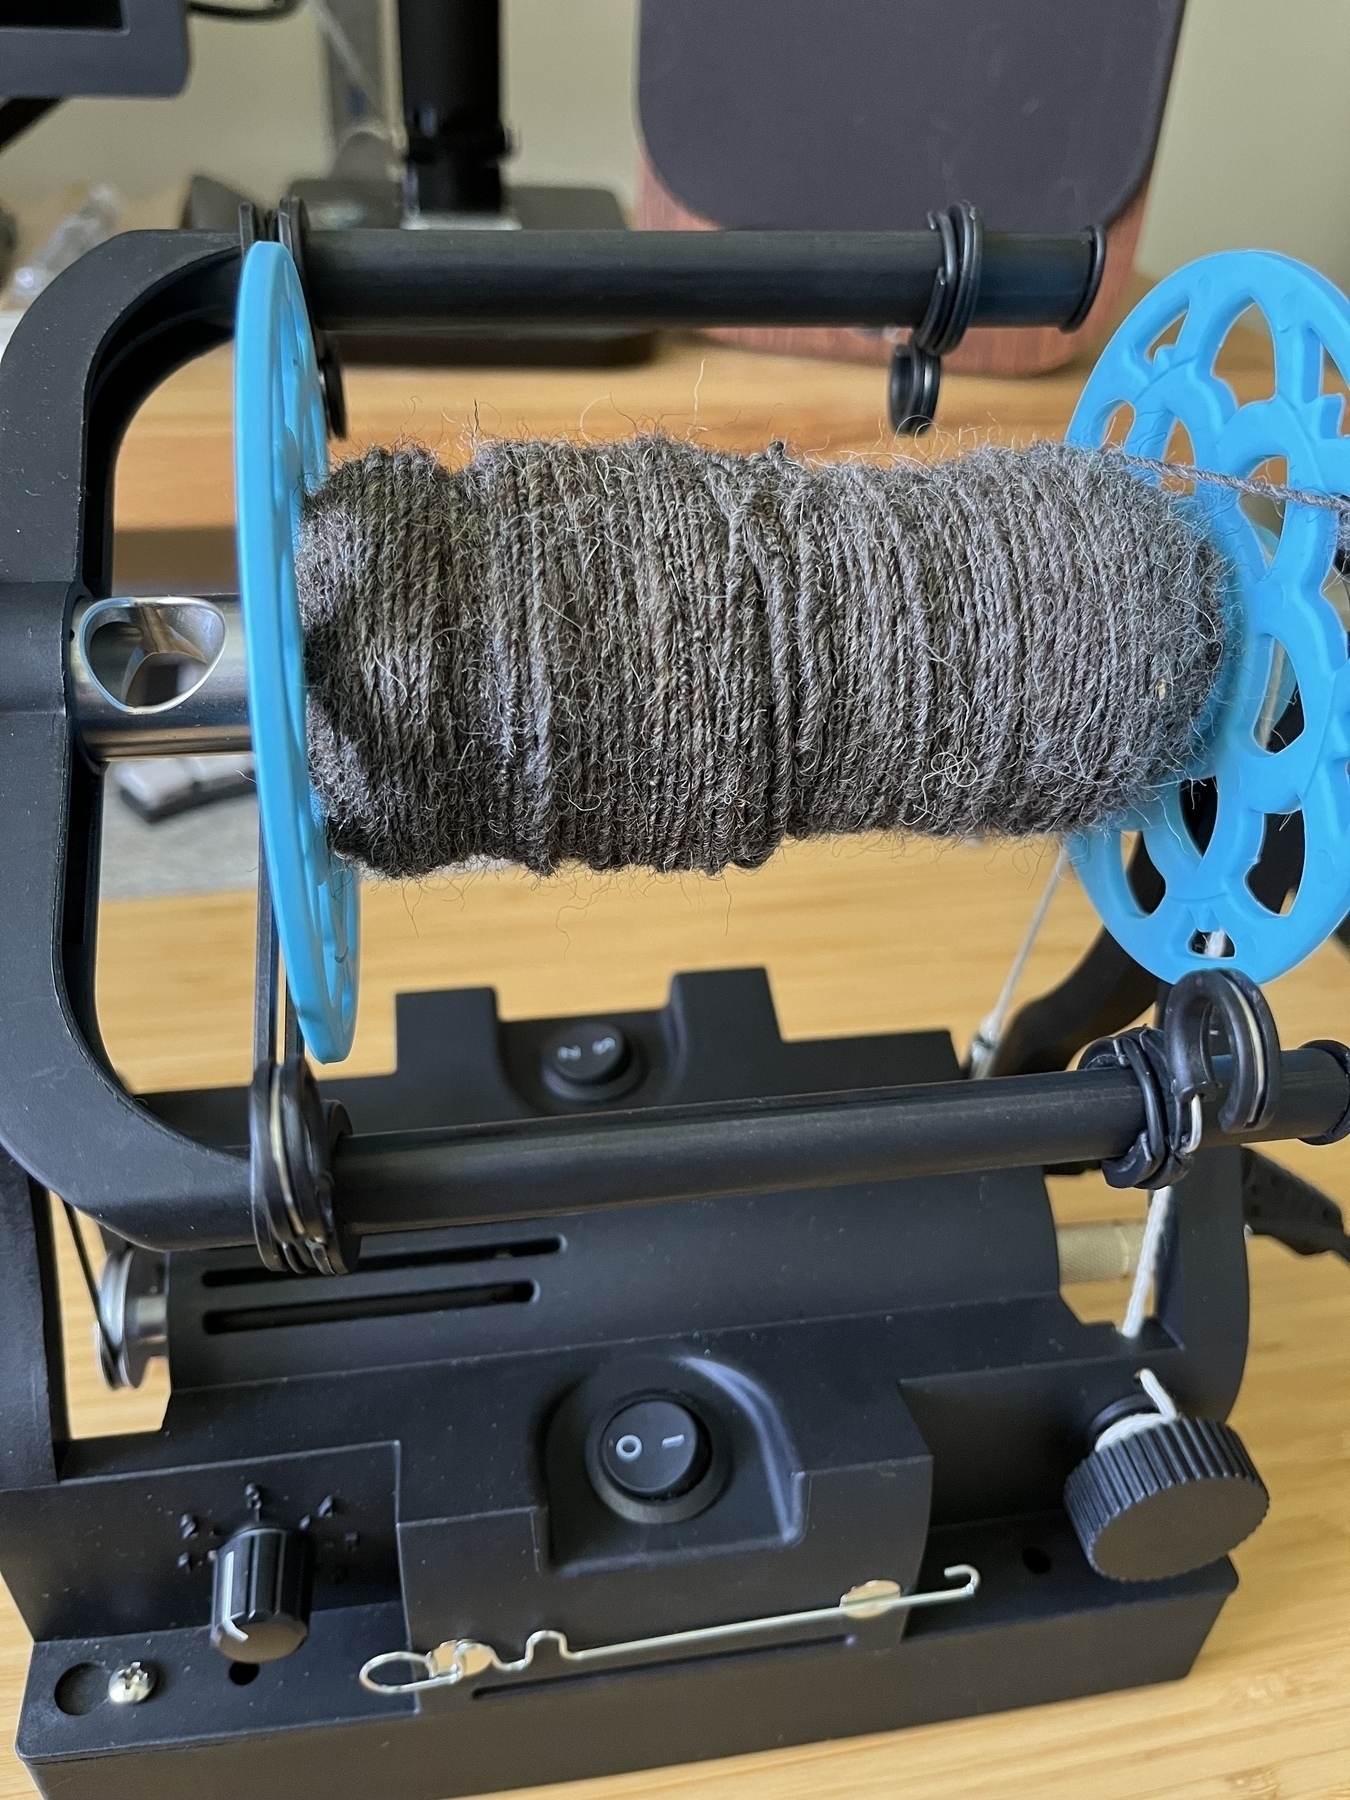 A blue e-spinner bobbin with a good covering of mid-grey hand spun yarn. 